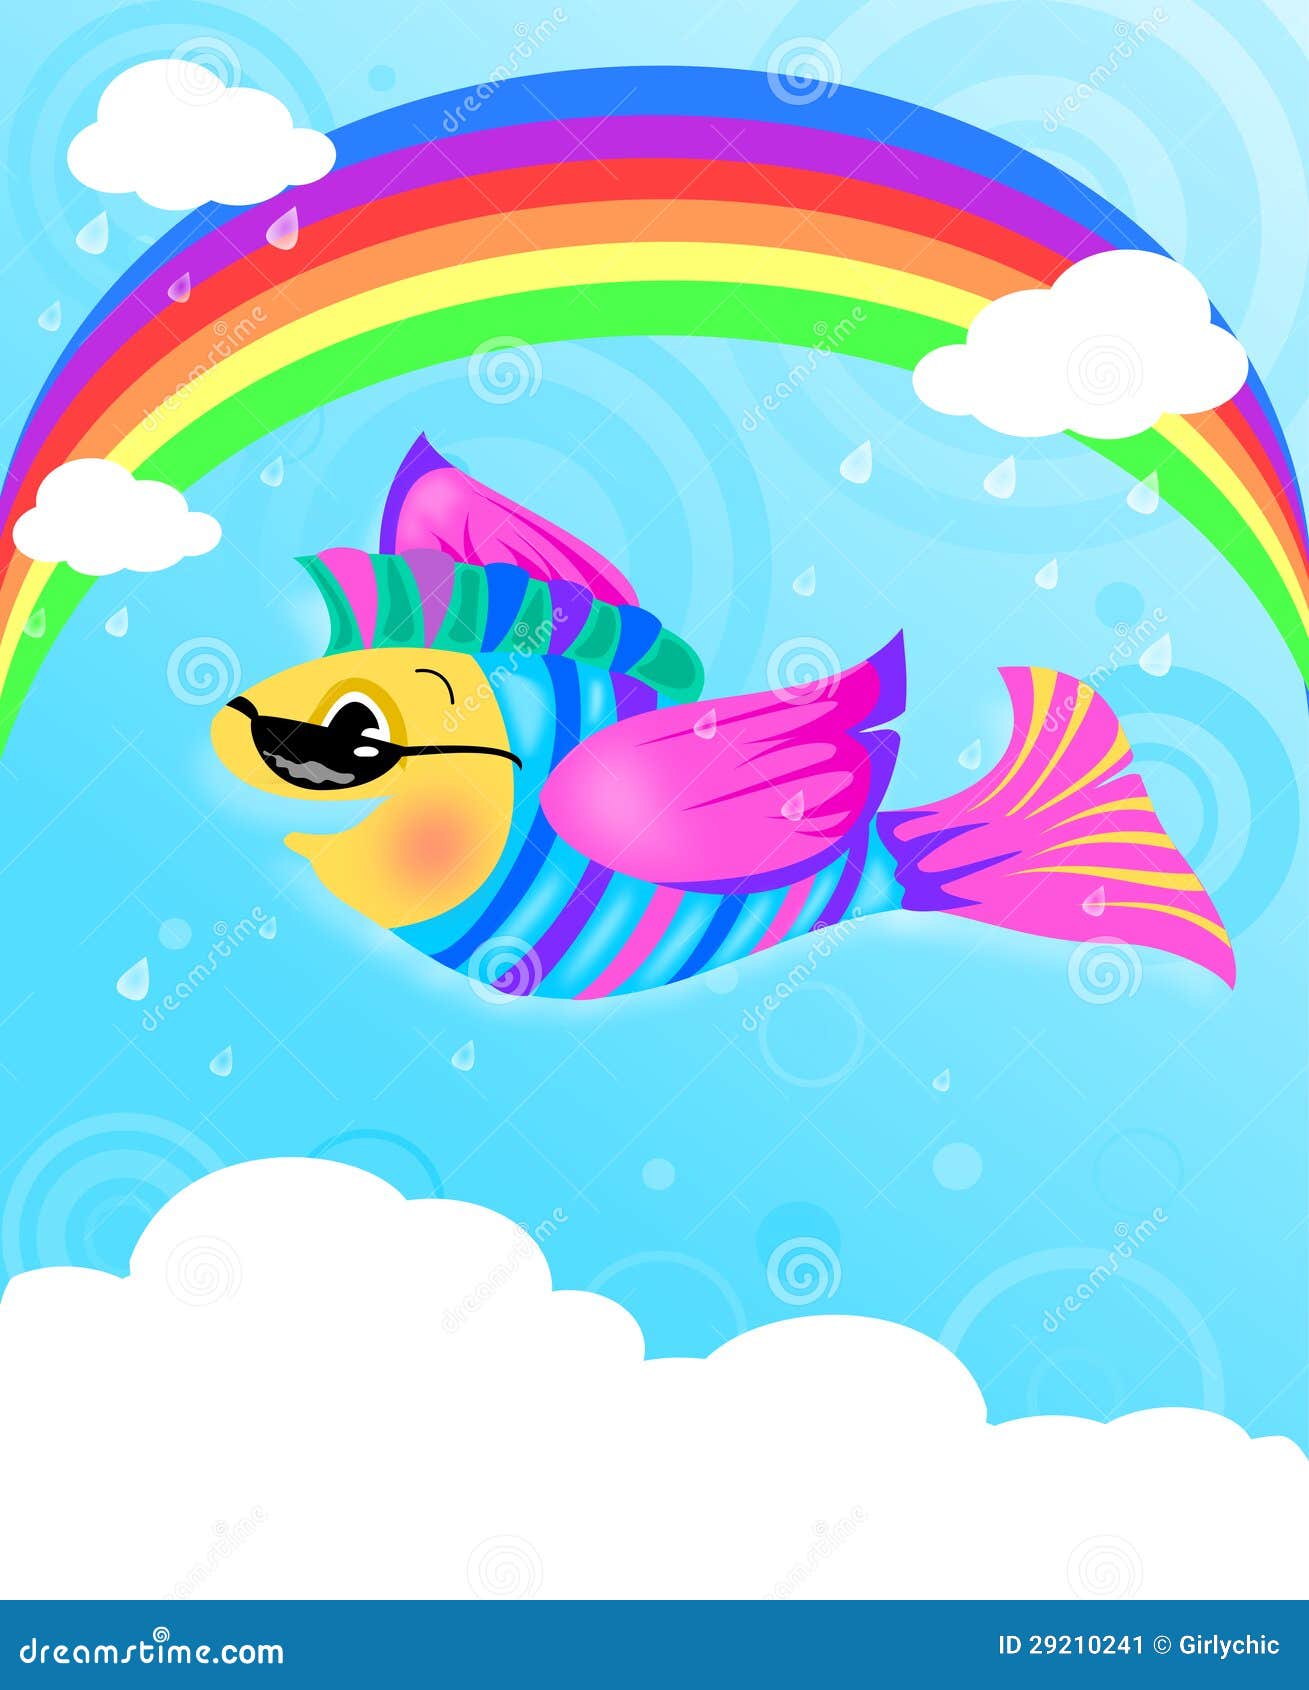 clipart flying fish - photo #14